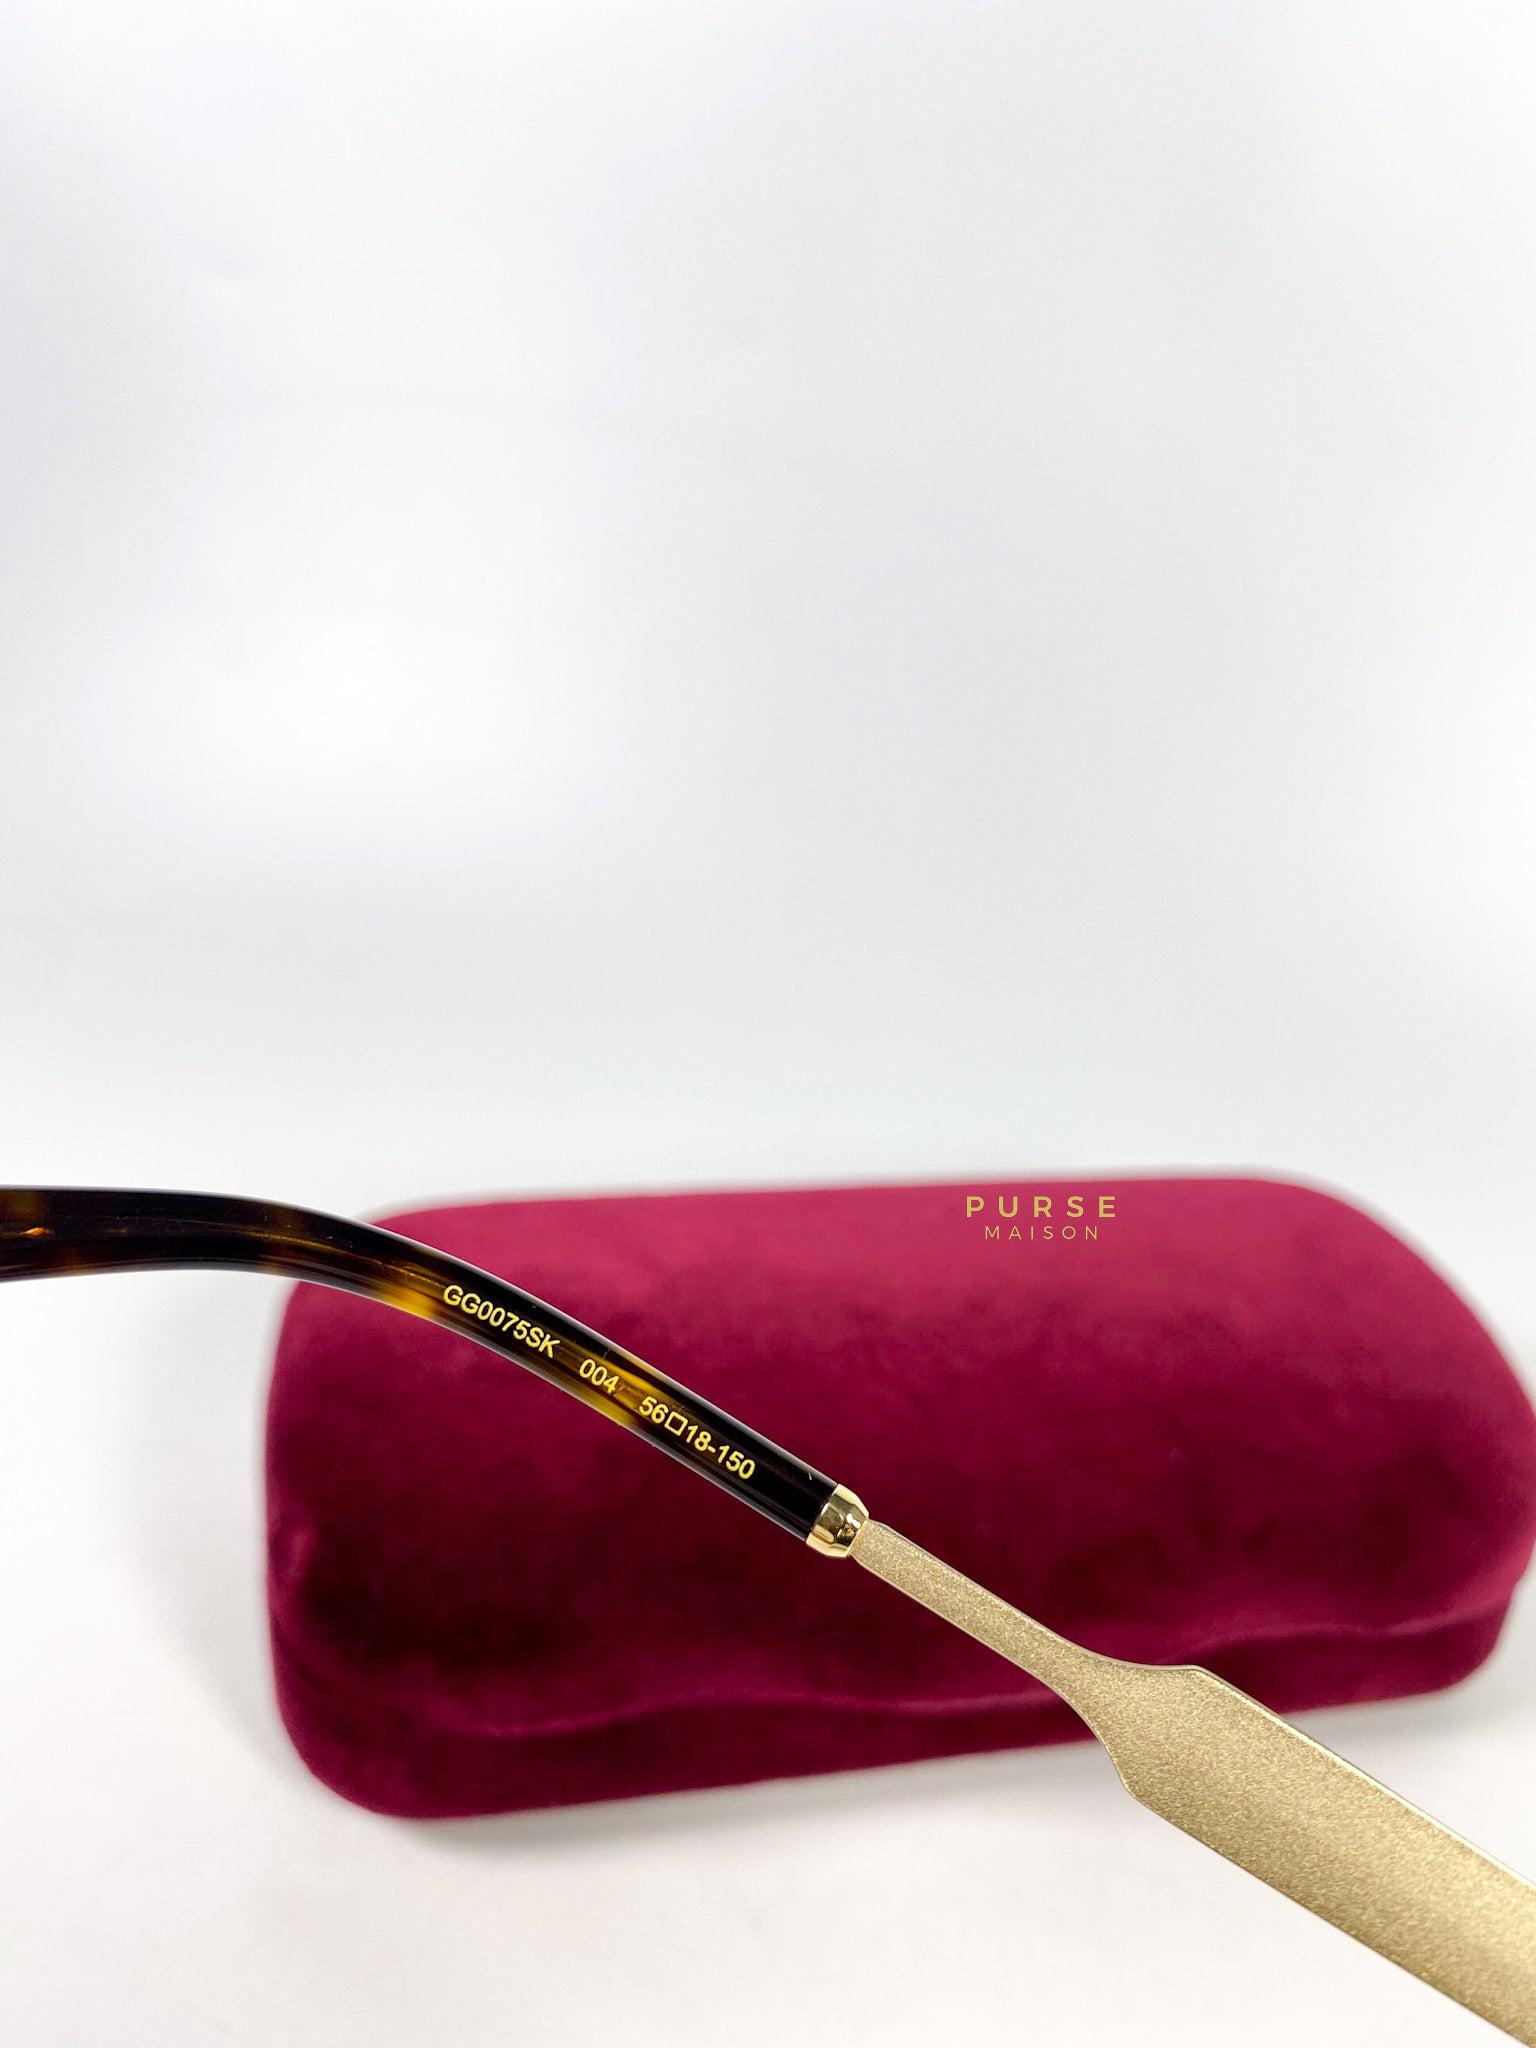 Gucci Light Gold Metal Maroon Frame Round Sunglasses